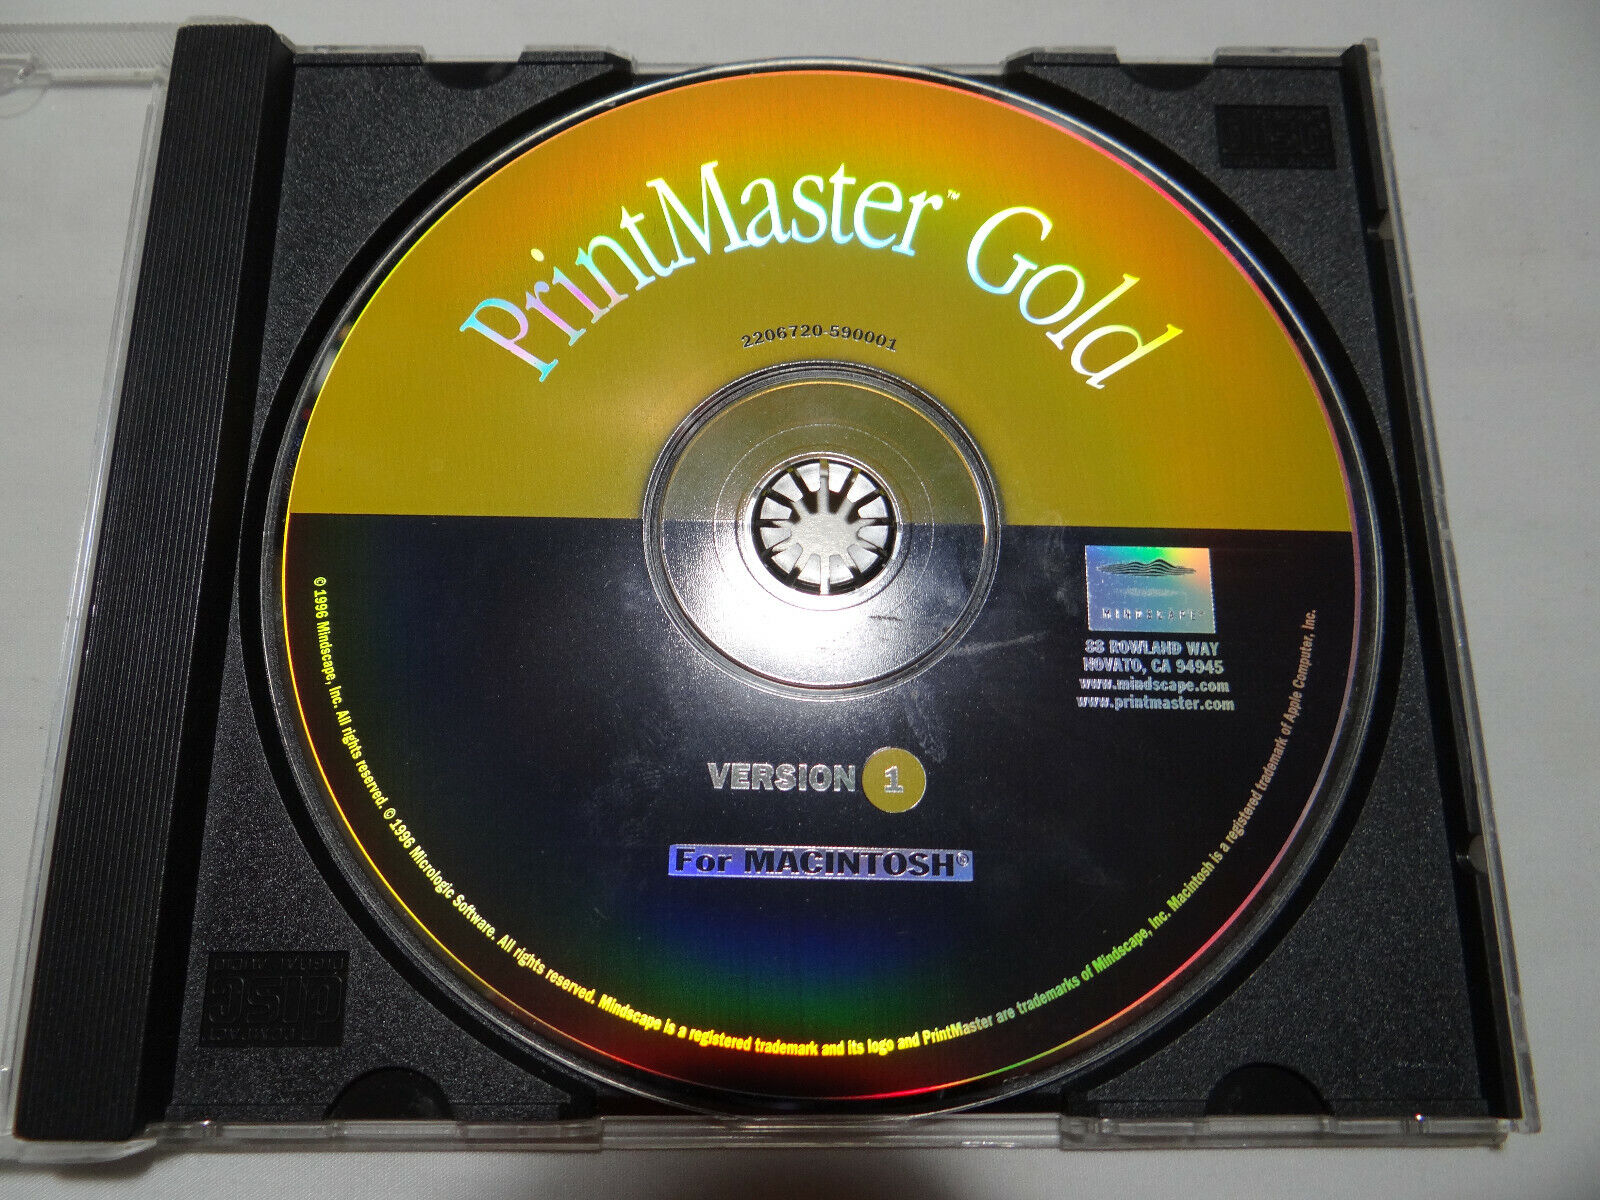 Print Master Gold - for Maciintosh CD